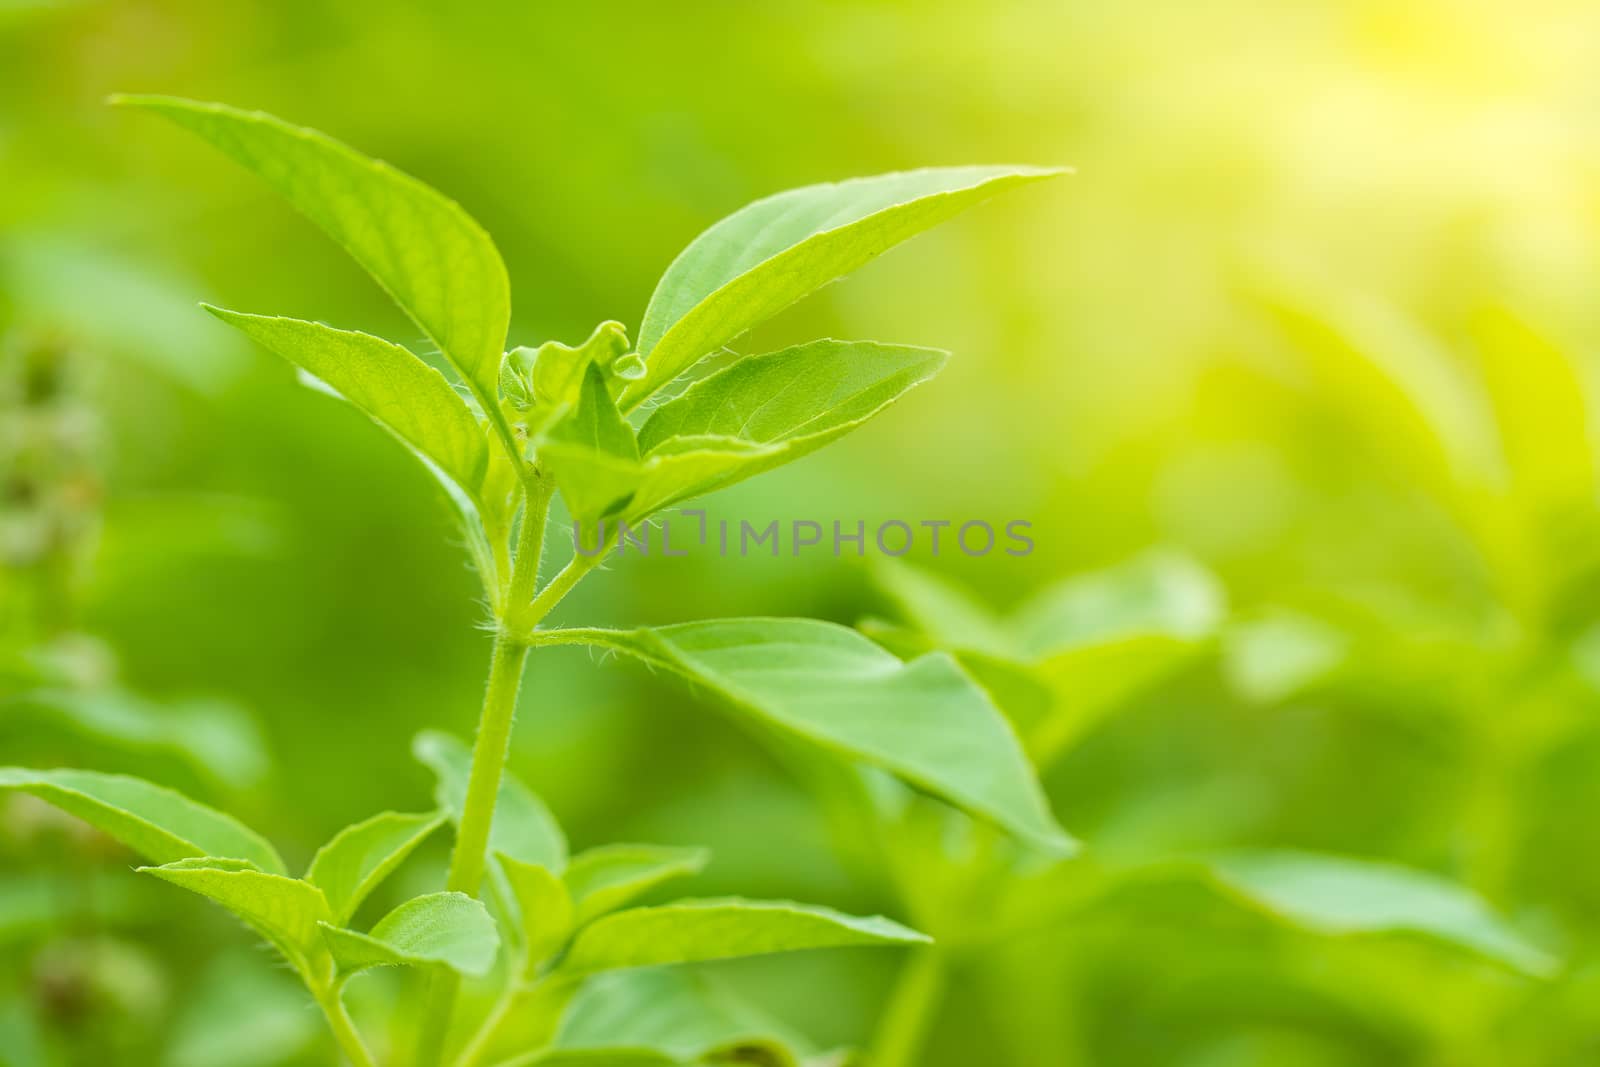 Hairy basil or Ocimum basilicum tree in morning sunlight. It is herbs and ingredients for cooking in Thai food. Smooth green nature background. Copy space for text.